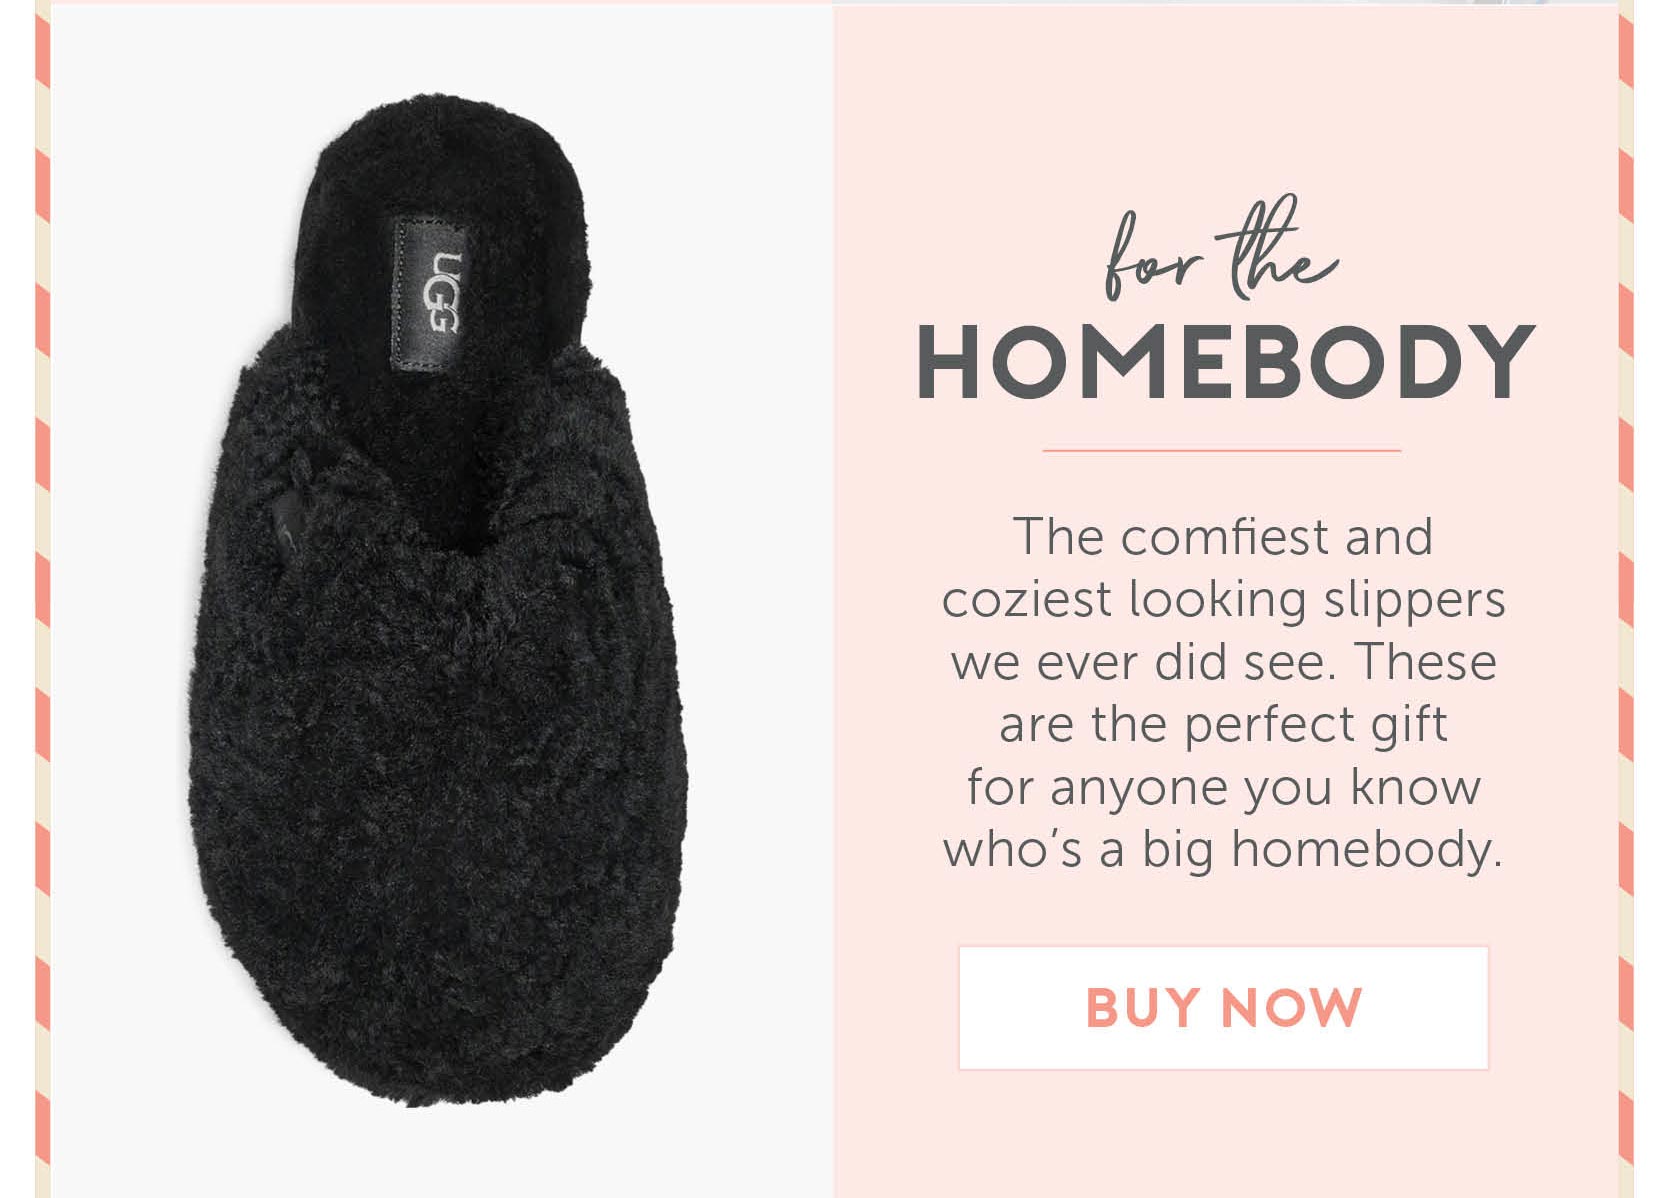 For The Homebody - The comfiest and coziest looking slippers we ever did see. These are the perfect gift for anyone you know who’s a big homebody.